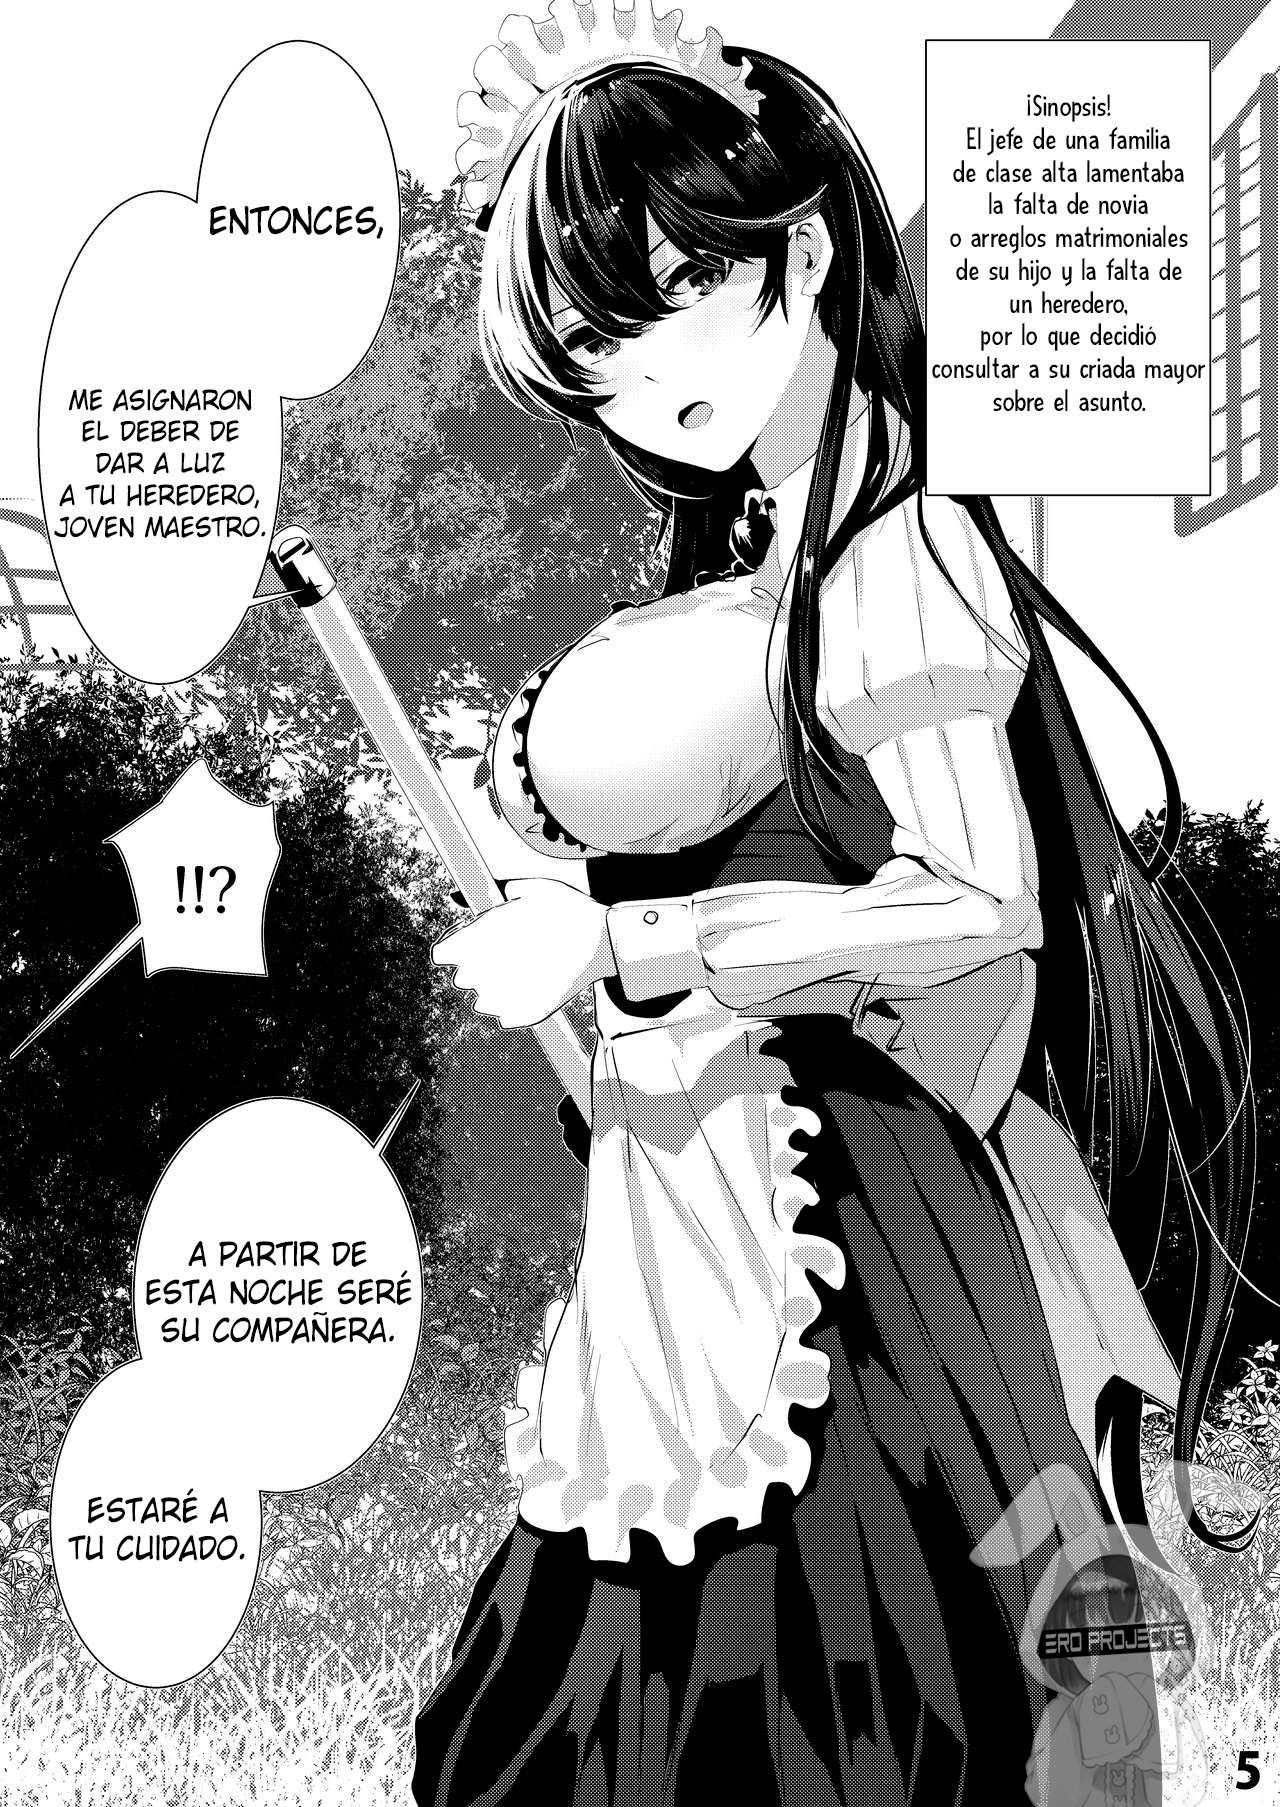 Maguro Maid to Shikotama Ecchi - Lots of Sex With a Dead Lay Maid (Ero Projects) - 3